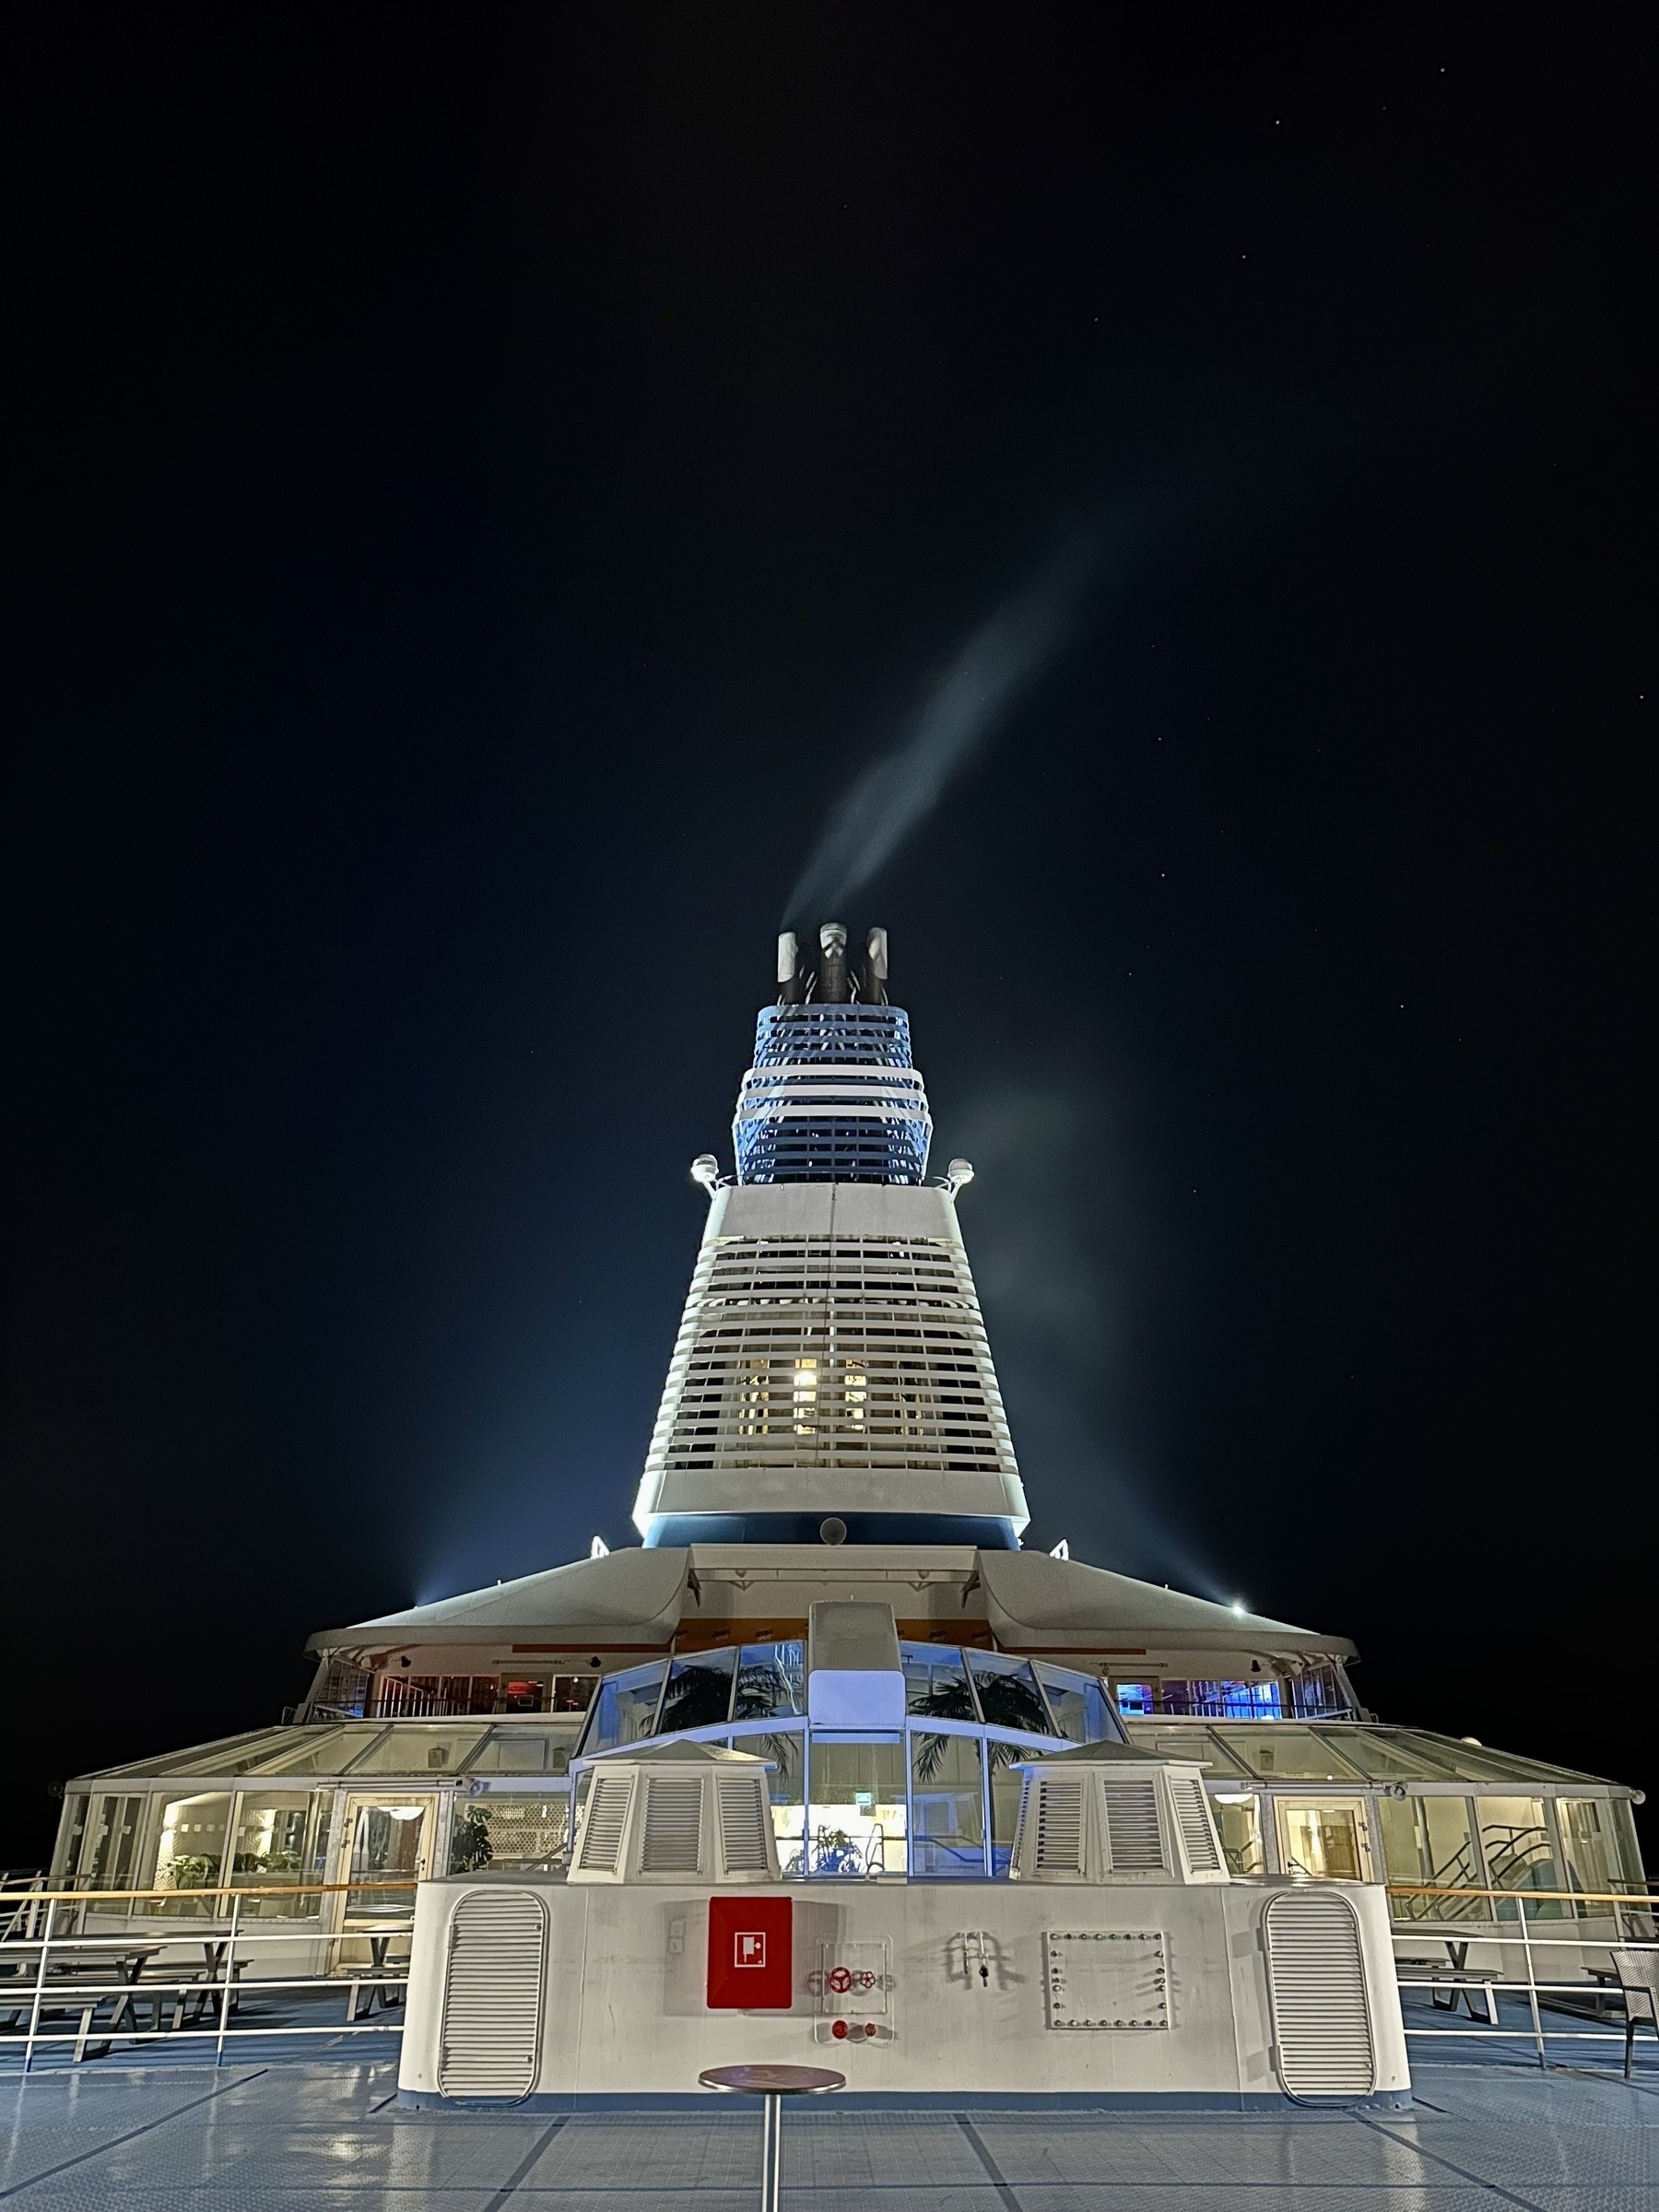 The funnel of a cruise ship at night.